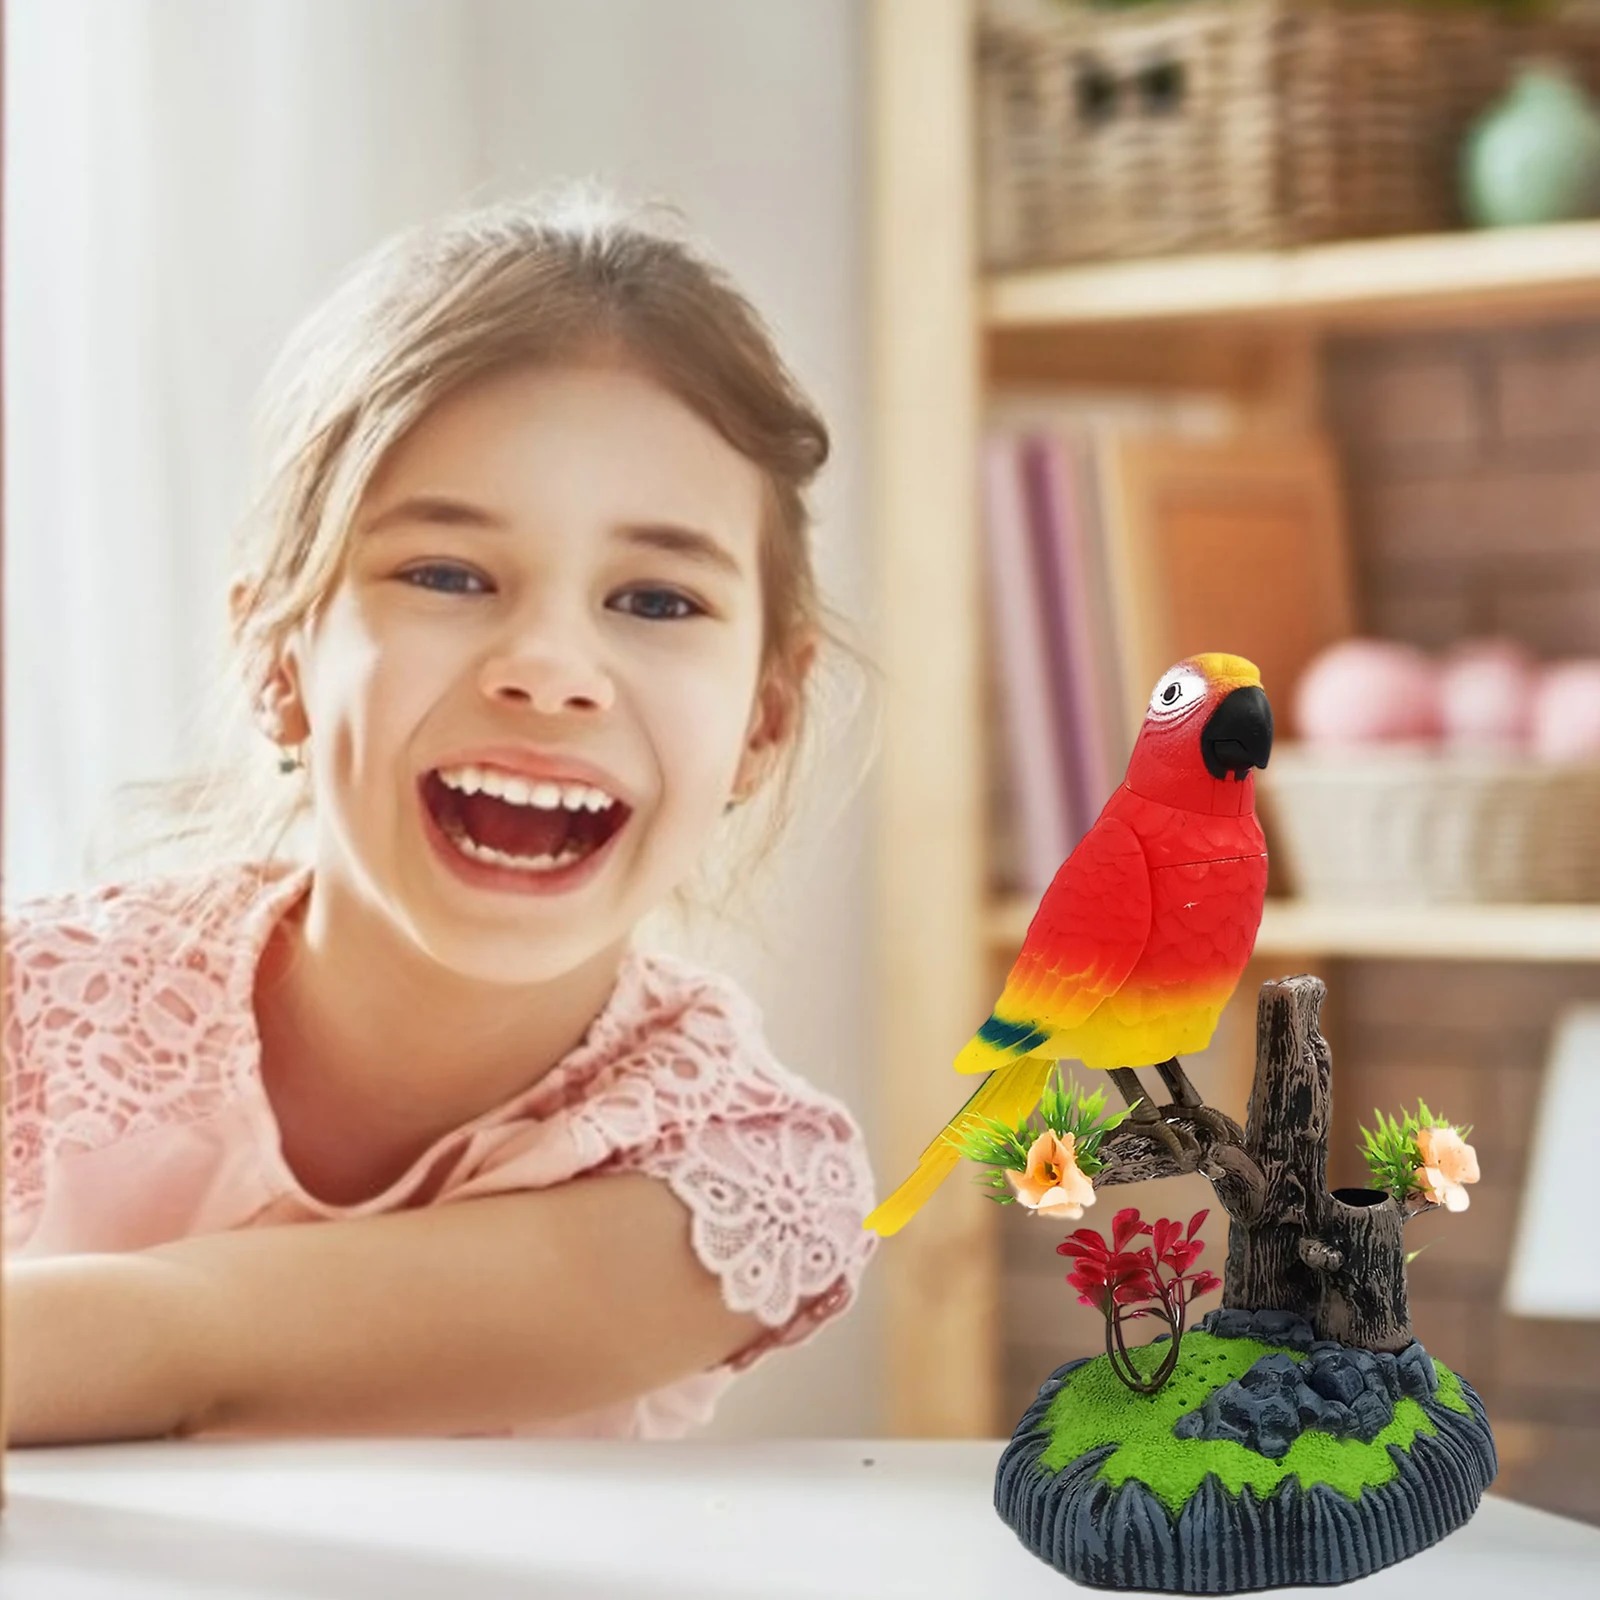 Singing Chirping Birds Toys Battery Operated Electronic Animal Pets Office Room Ornament Accessories Kids Birthday Gifts